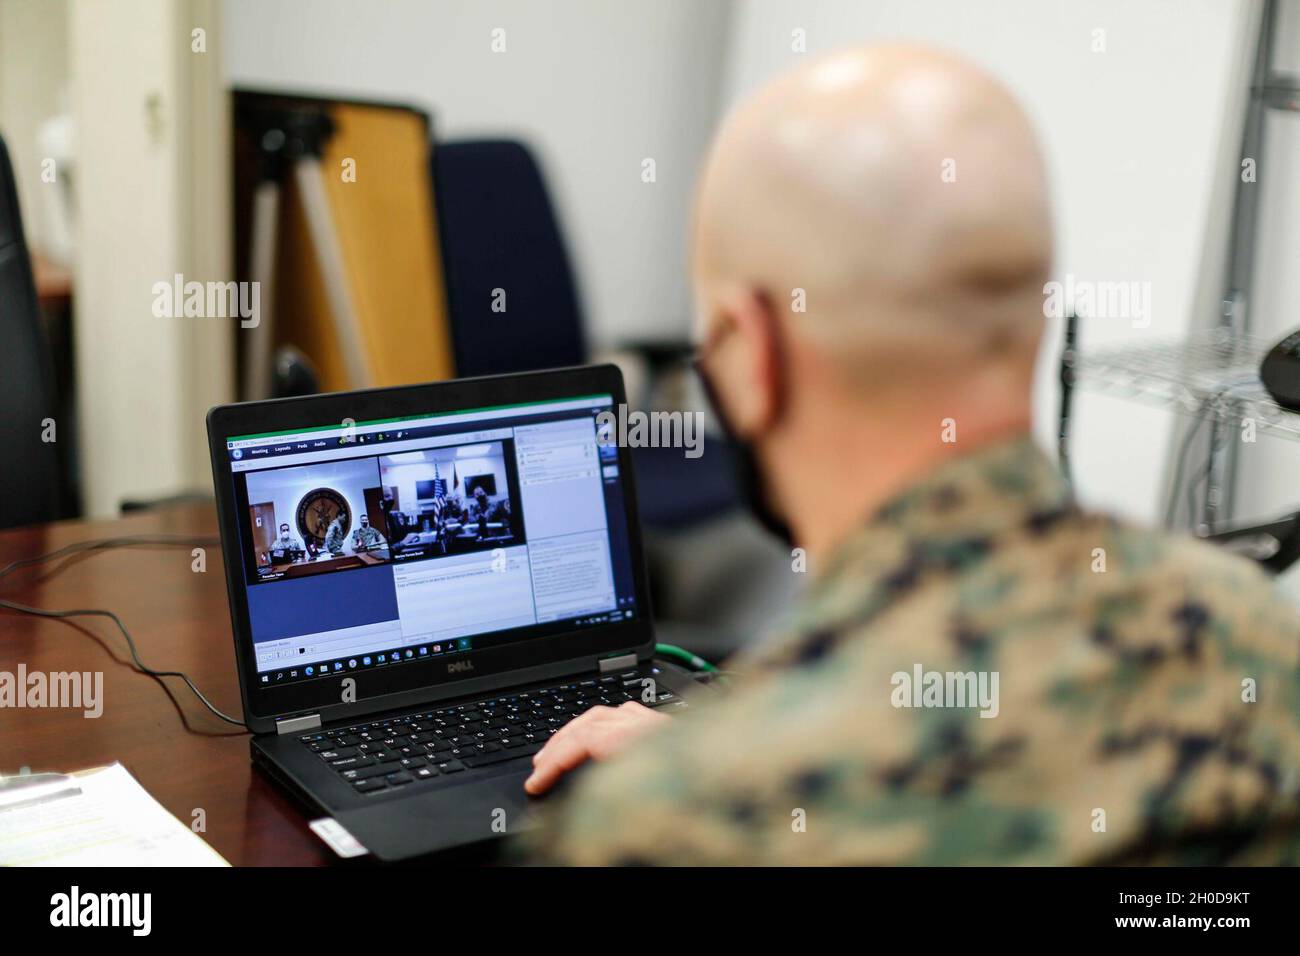 U.S. Marine Maj. Landry Guillory, a foreign area officer with U.S. Marine Corps Forces, South, speaks with members from Peruvian armed forces during a staff planners working group virtual meeting at U.S. Southern Command in Miami, Florida, Jan. 29, 2021. The staff planners working group consisted of planners from U.S. Marine Corps Forces, South, and U.S. Naval Forces Southern Command/U.S. 4th Fleet, the Peruvian Navy’s Pacific Operations Command, Peruvian Marines from the Marine Amphibious Brigade and the Navy section chief of the Security Cooperation Office at the U.S. Embassy in Lima, Peru. Stock Photo